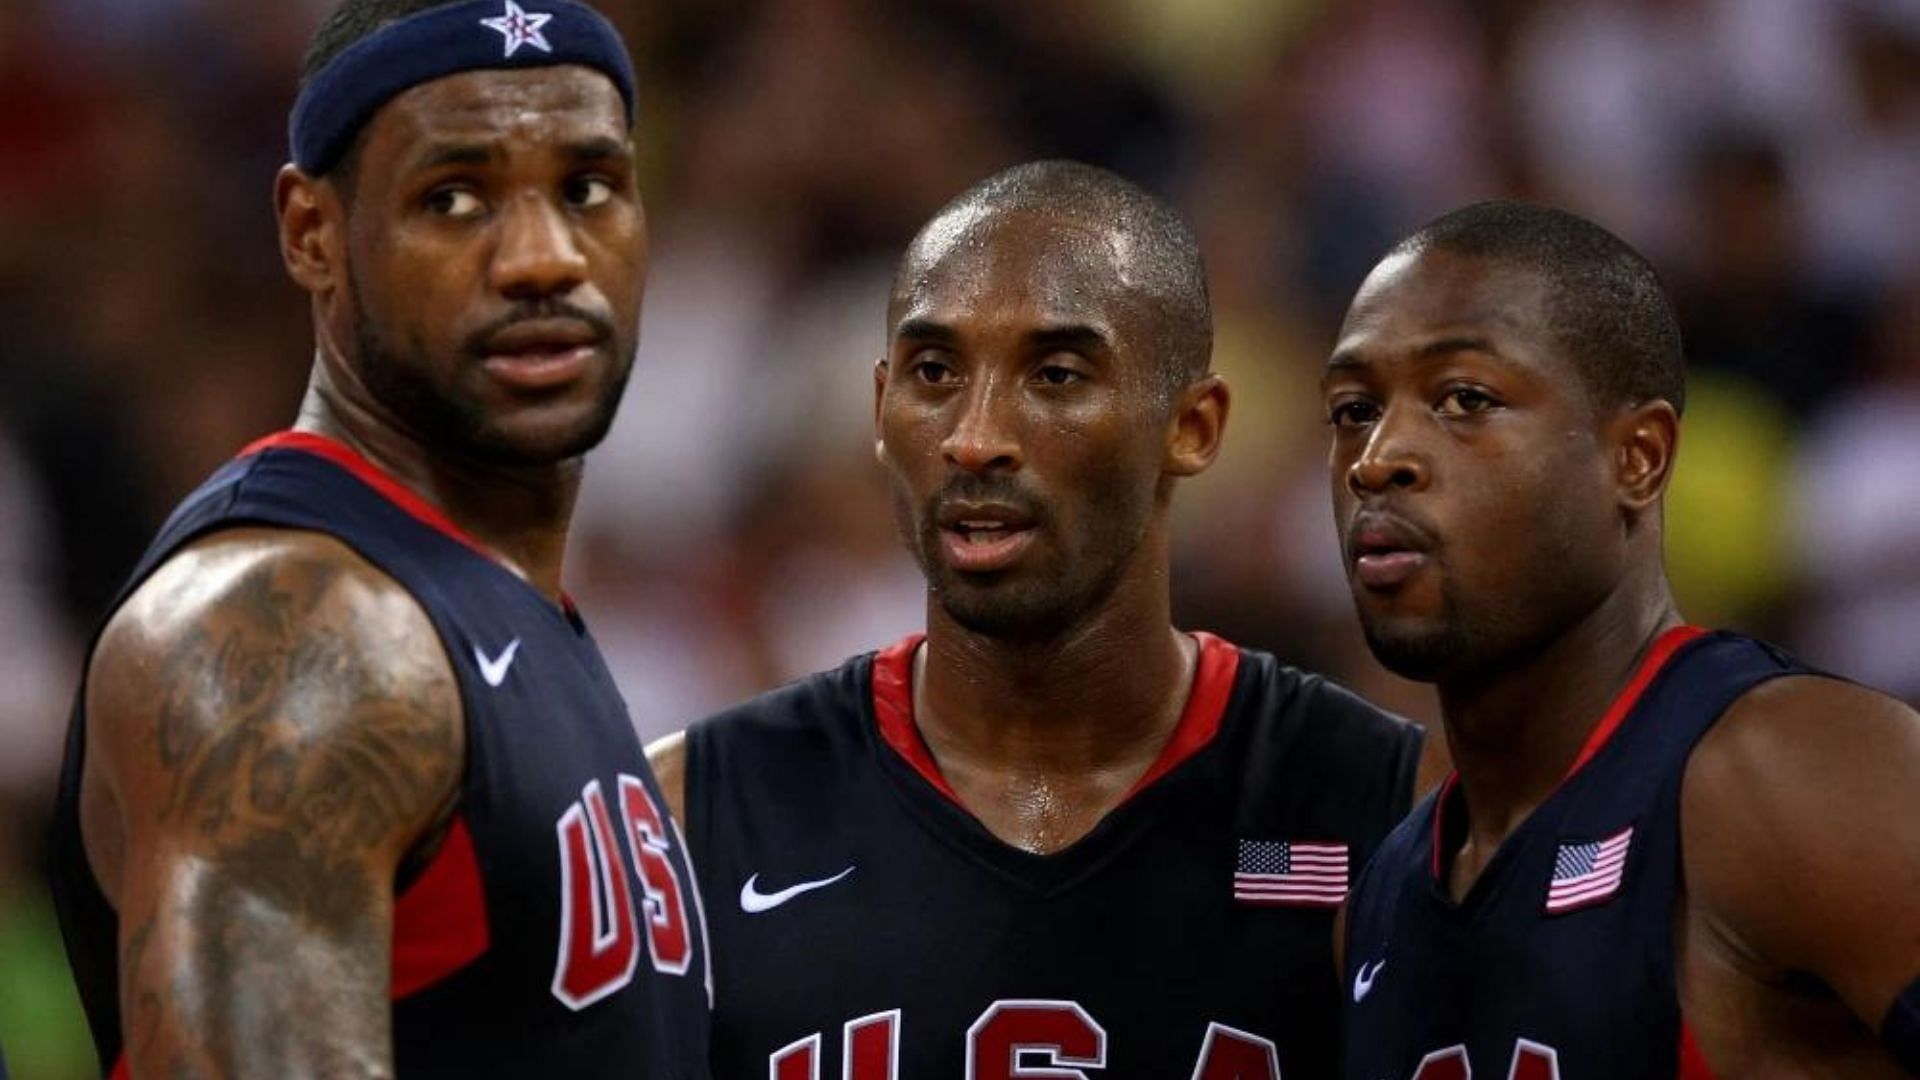 LeBron James, Kobe Bryant and Dwyane Wade in action [Source: USA Today]